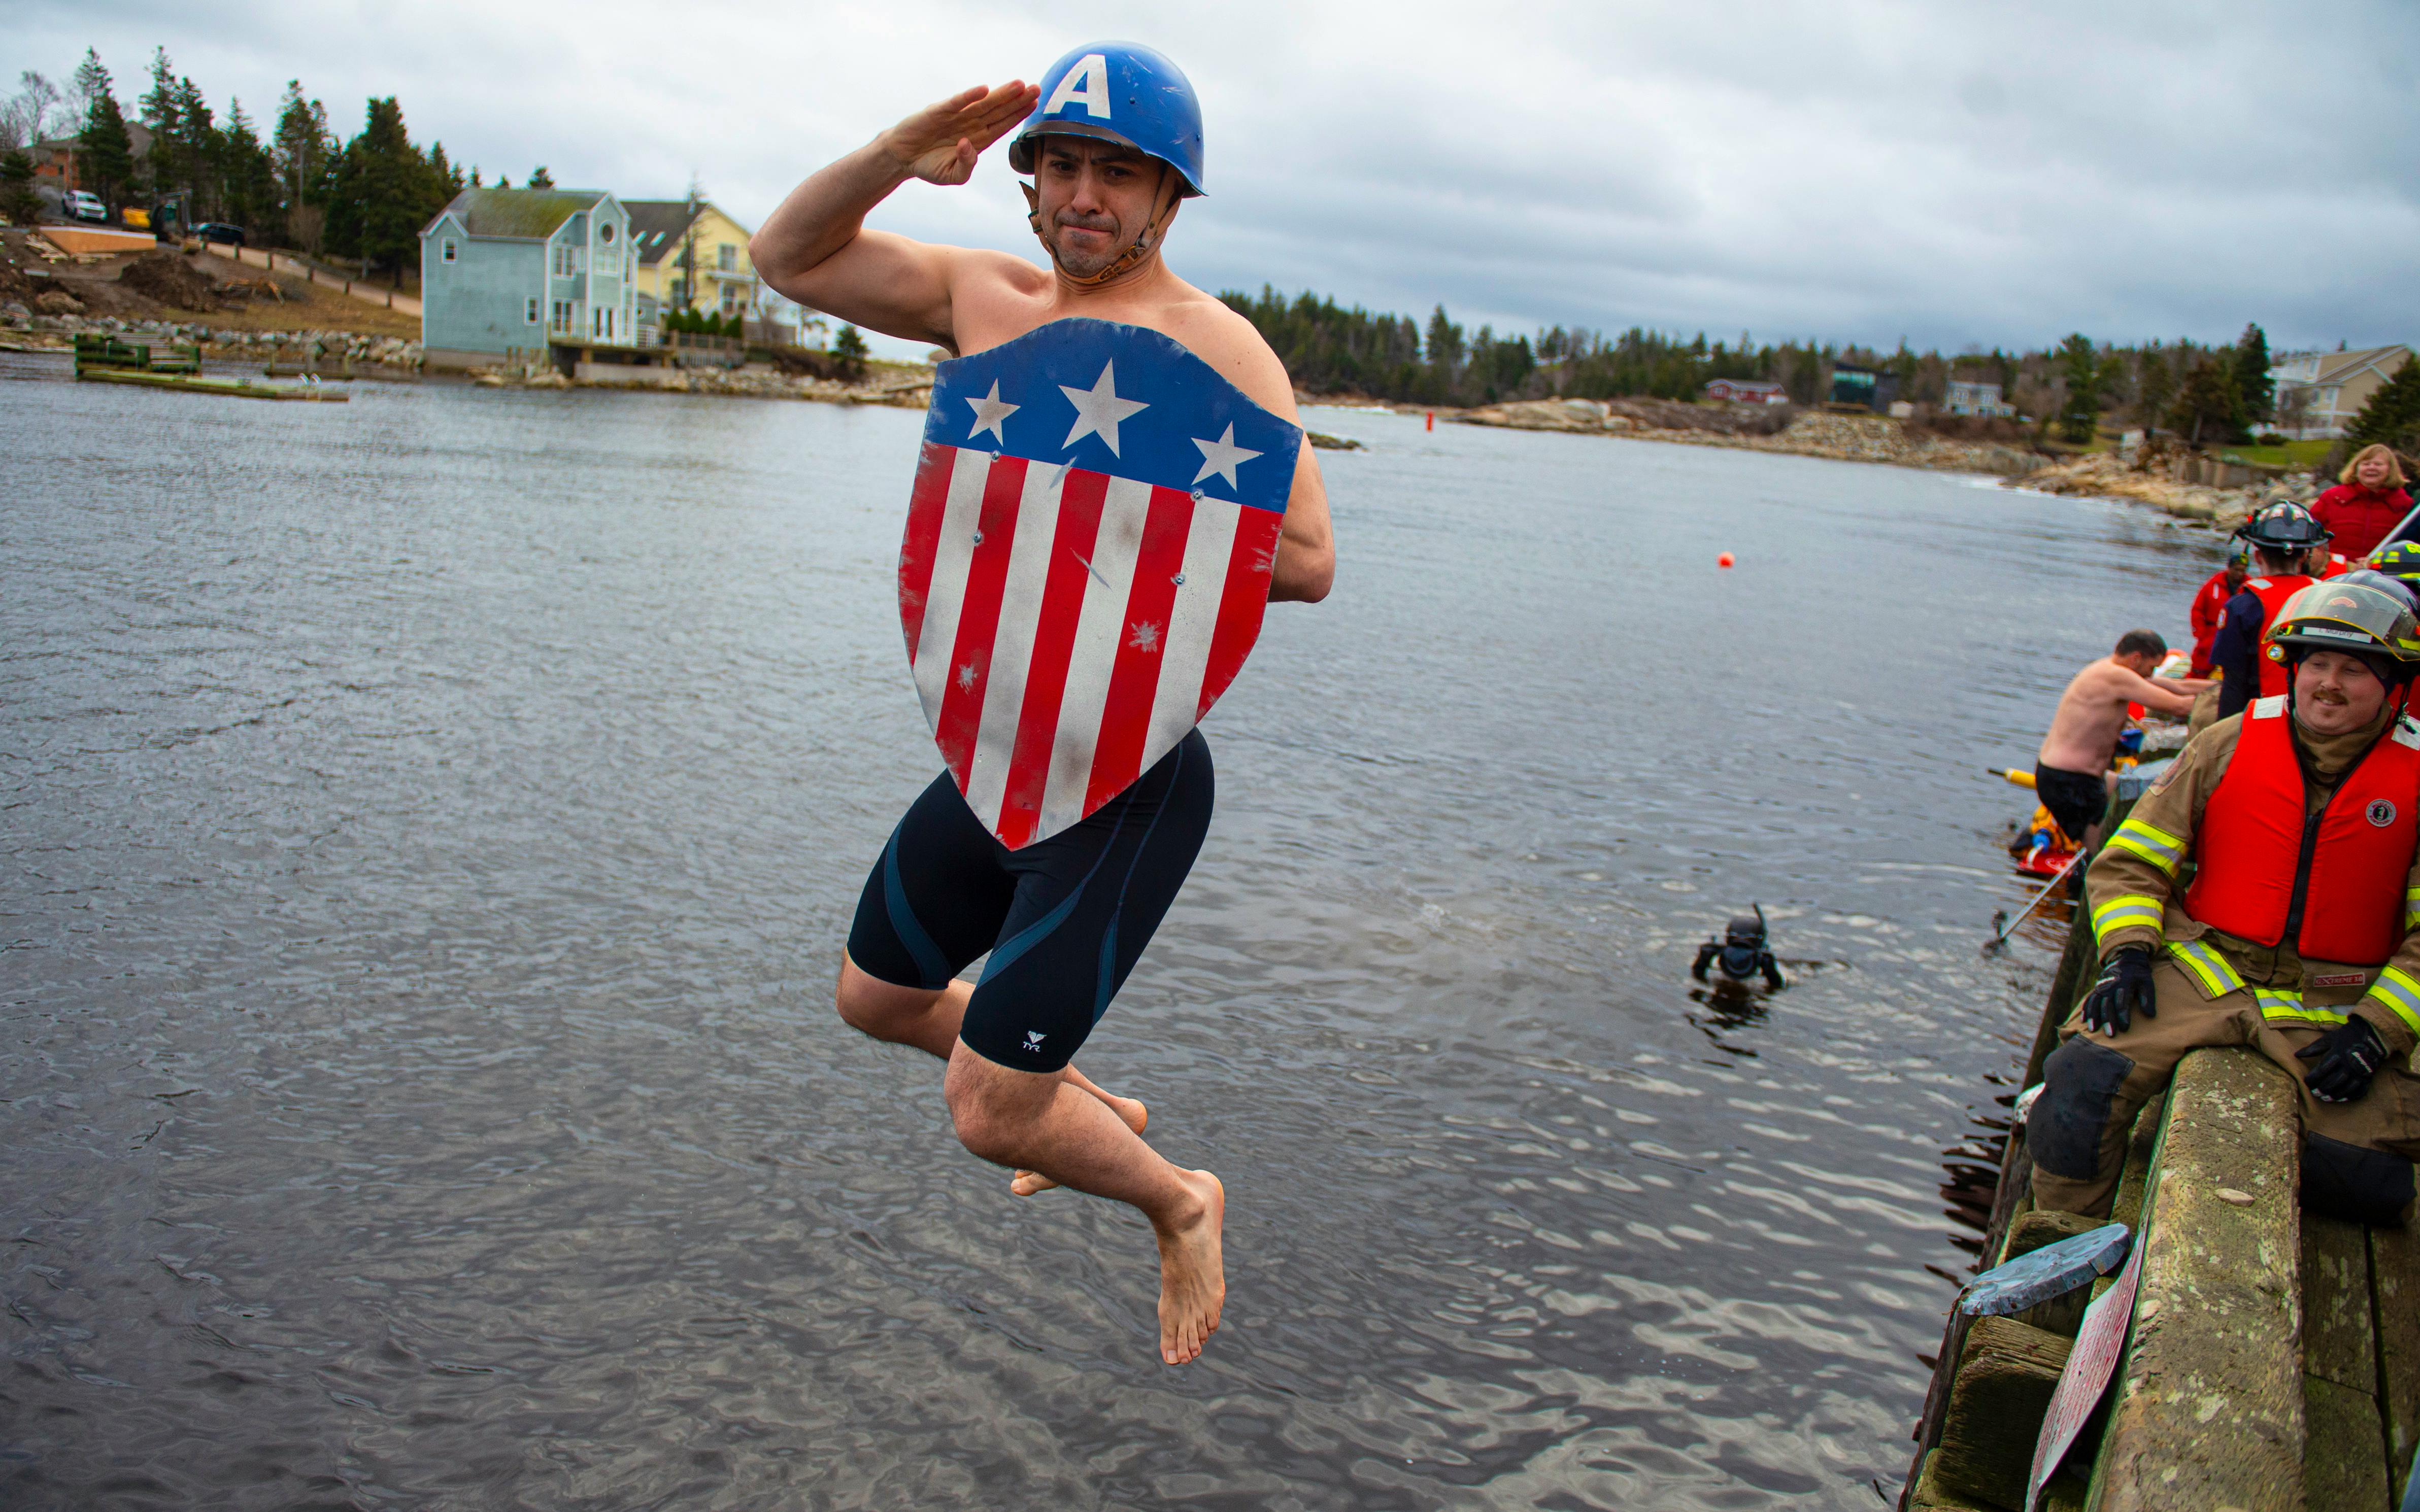 Captain America, a.k.a. Dartmouth's Andrew Maggio, salutes as he leaps into the cold water during the 26th Herring Cove Polar Bear Dip on Wednesday, January 1, 2020. This was Maggio's first time taking part in annual event and thought he might as well do it in style.